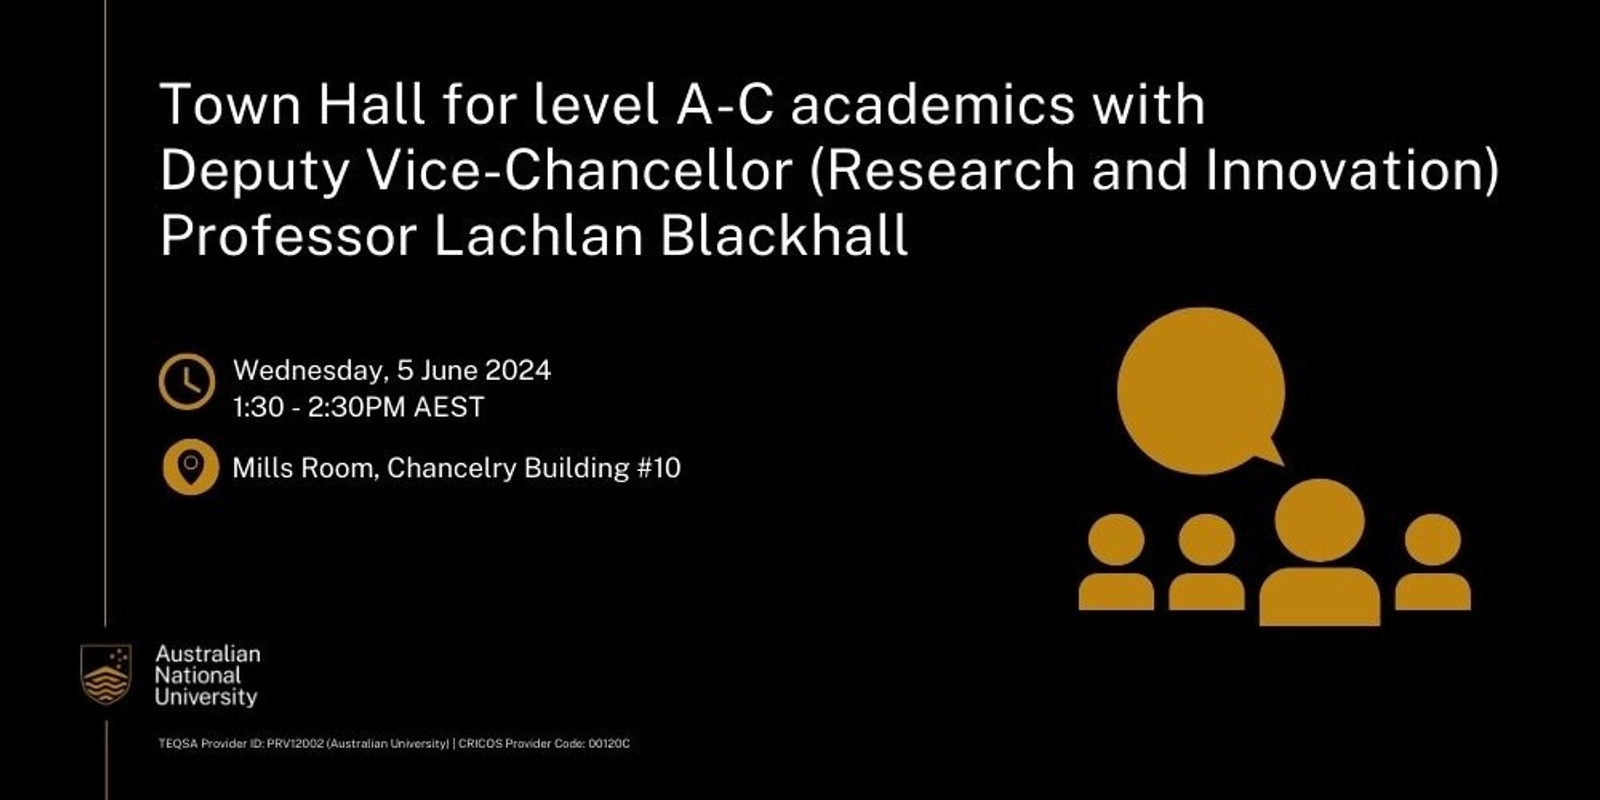 Banner image for Town Hall for level A-C academics with Deputy Vice-Chancellor (Research and Innovation) Professor Lachlan Blackhall